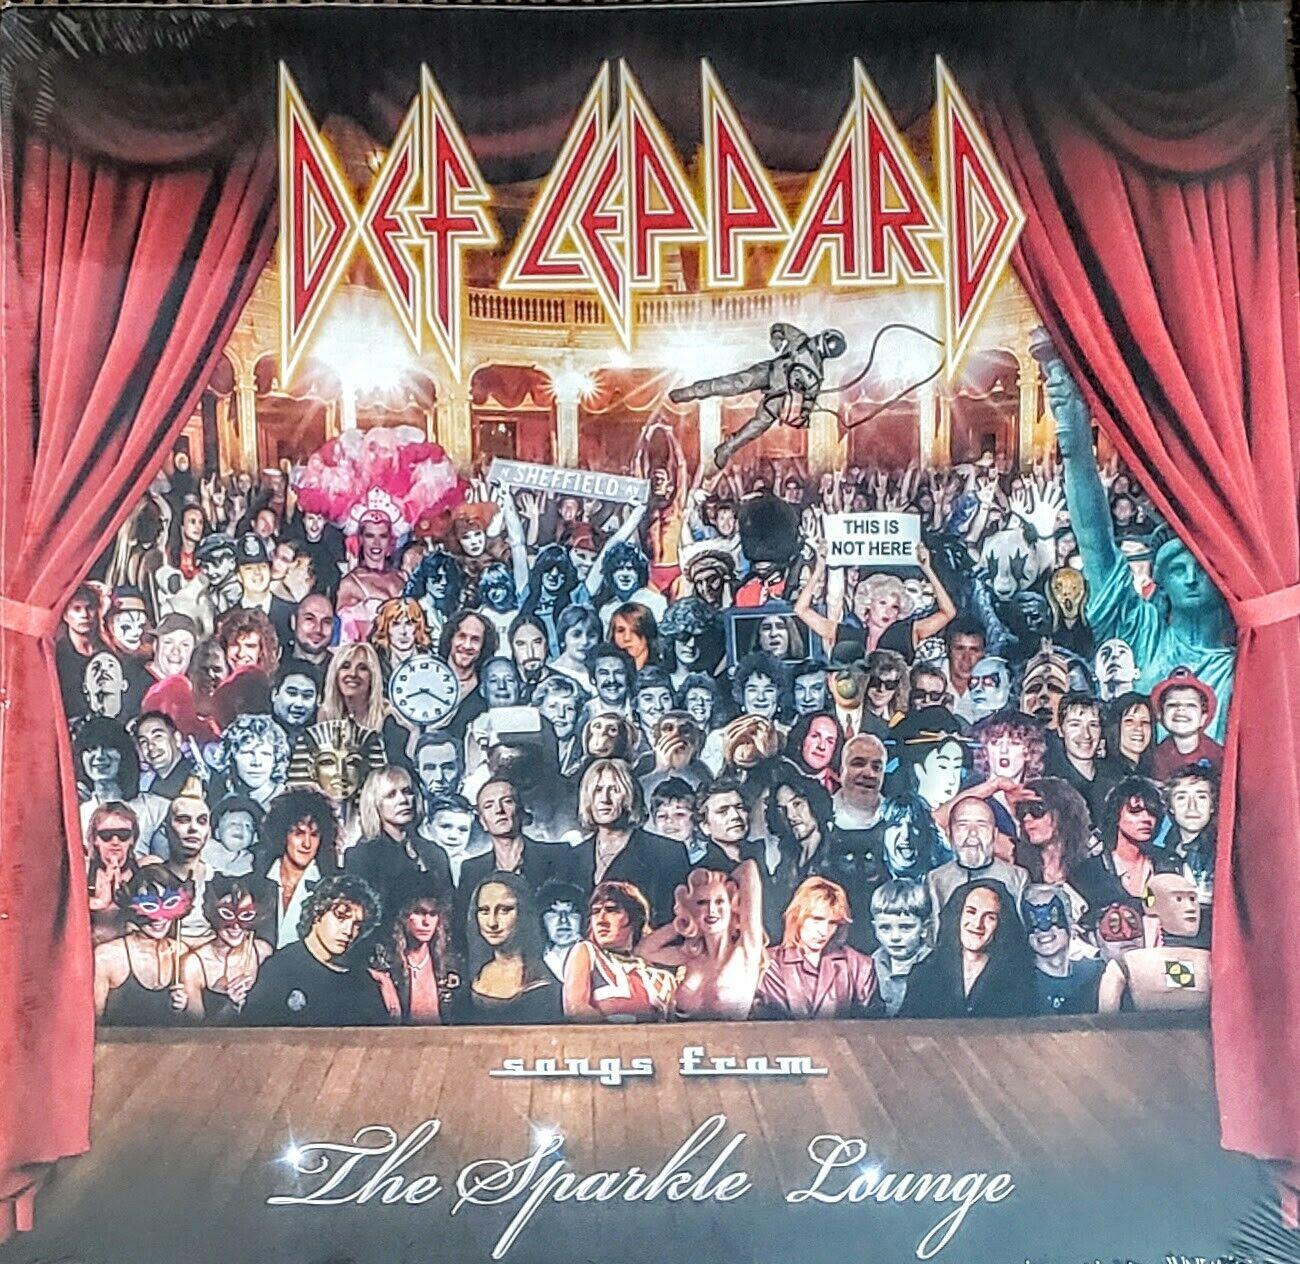 DEF LEPPARD - Songs From The Sparkle Lounge (Vinyl)